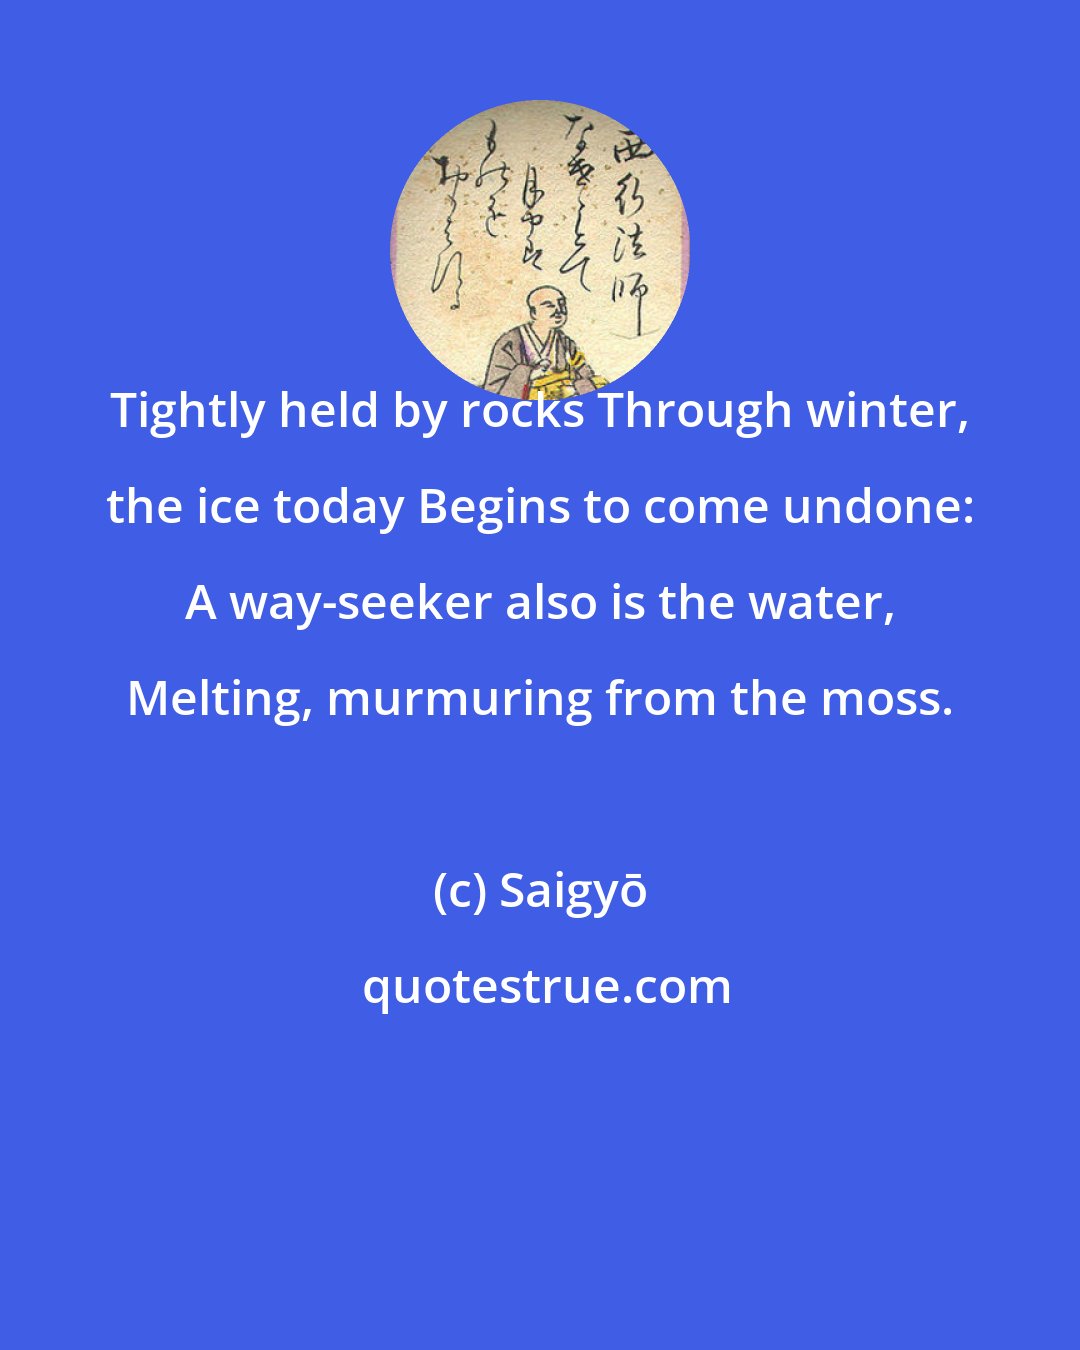 Saigyō: Tightly held by rocks Through winter, the ice today Begins to come undone: A way-seeker also is the water, Melting, murmuring from the moss.